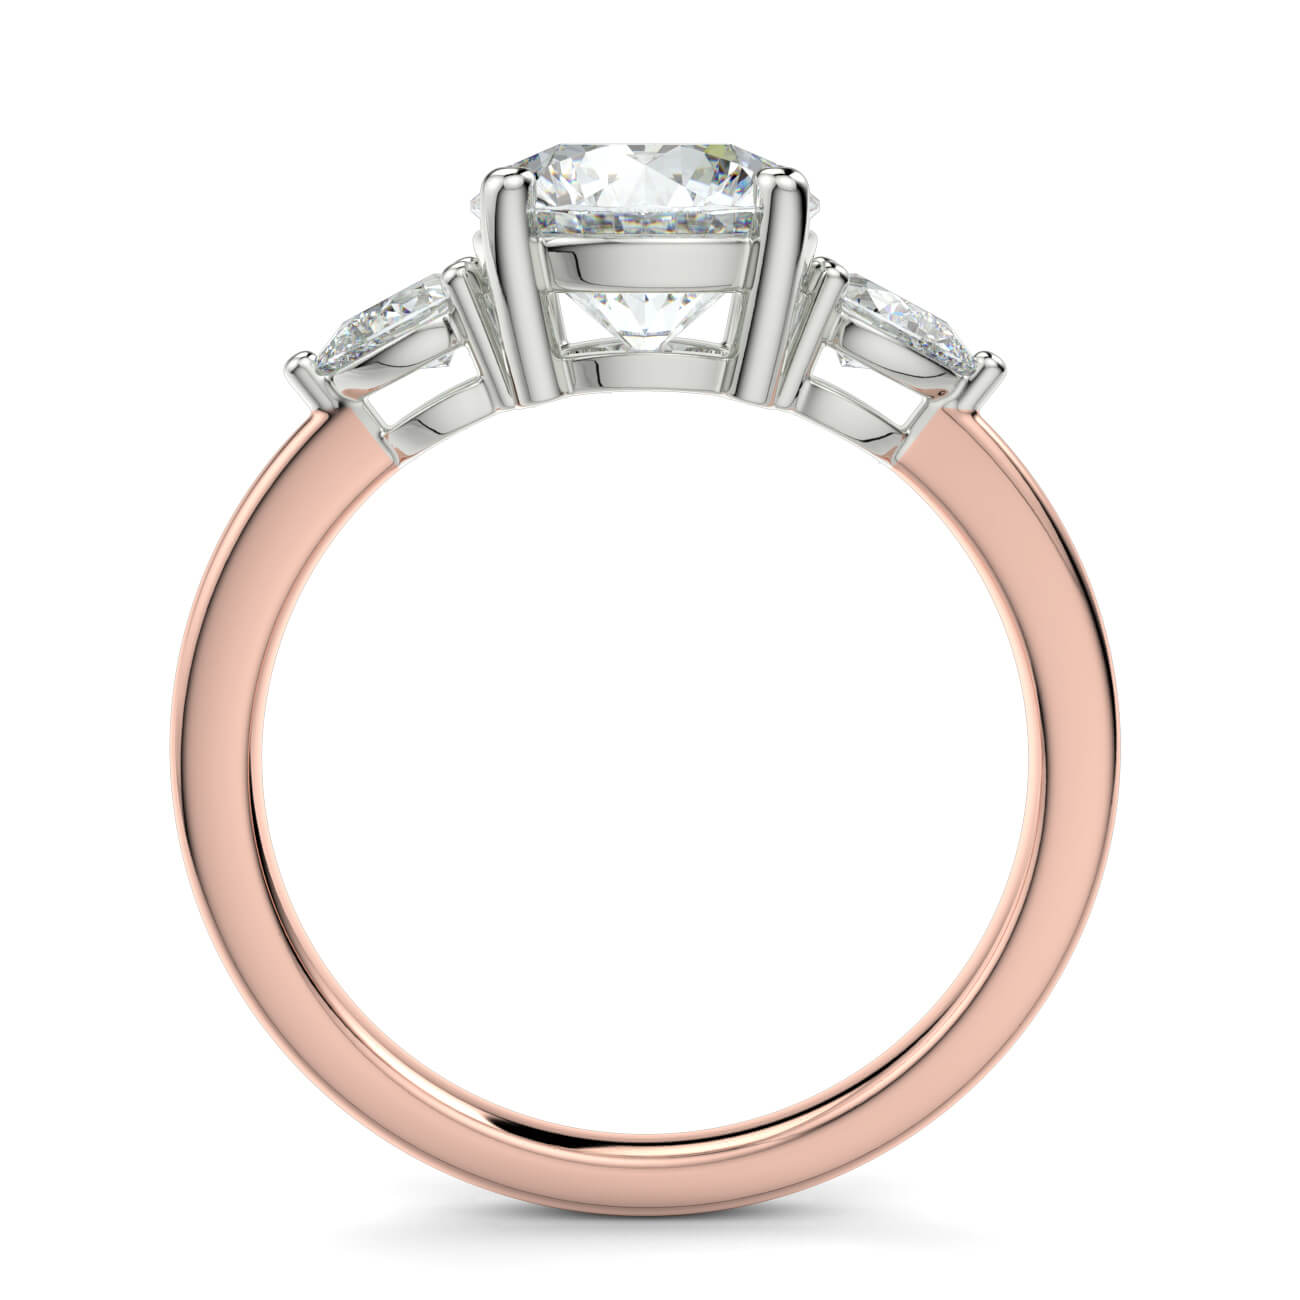 Round Brilliant Cut Diamond Ring With Pear Shape Side Diamonds In Rose and White Gold – Australian Diamond Network